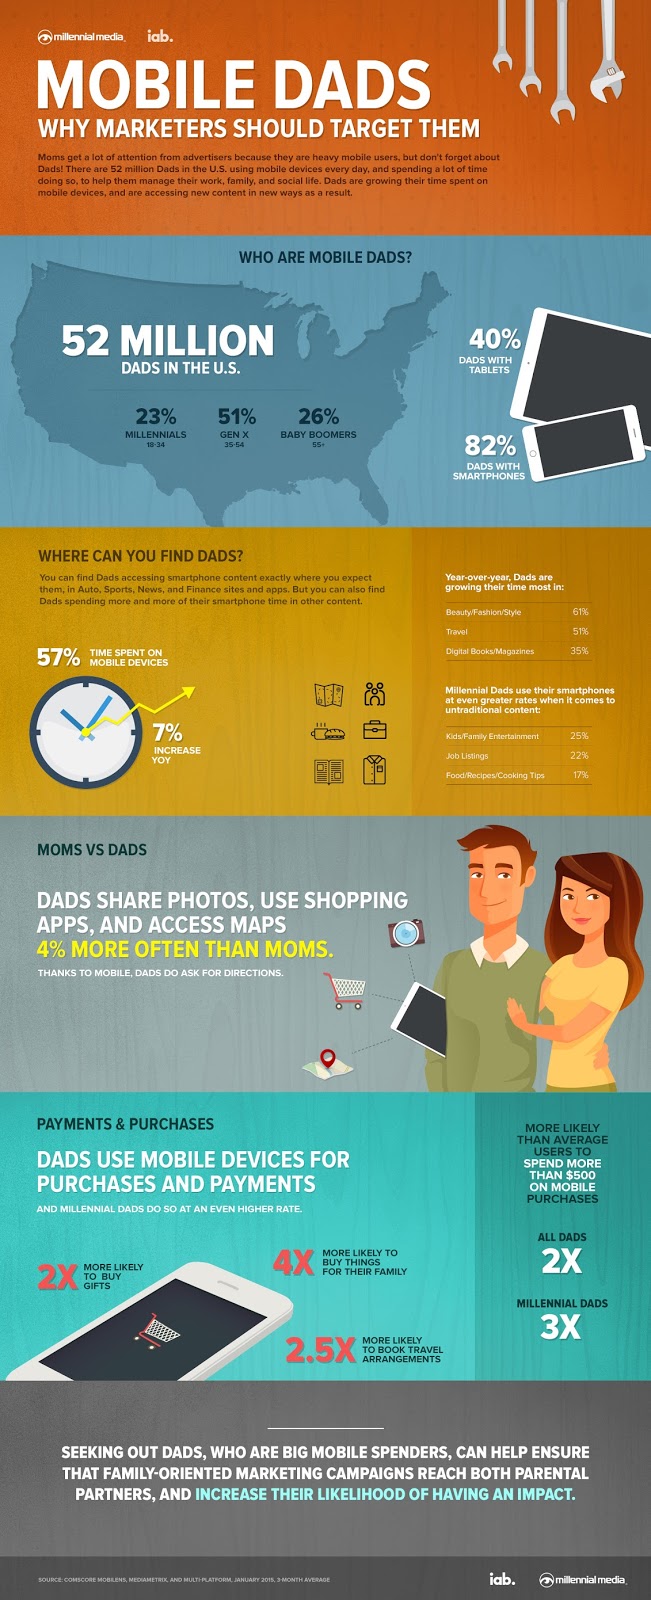 " the advent of the mobile  dad and advertising to them"